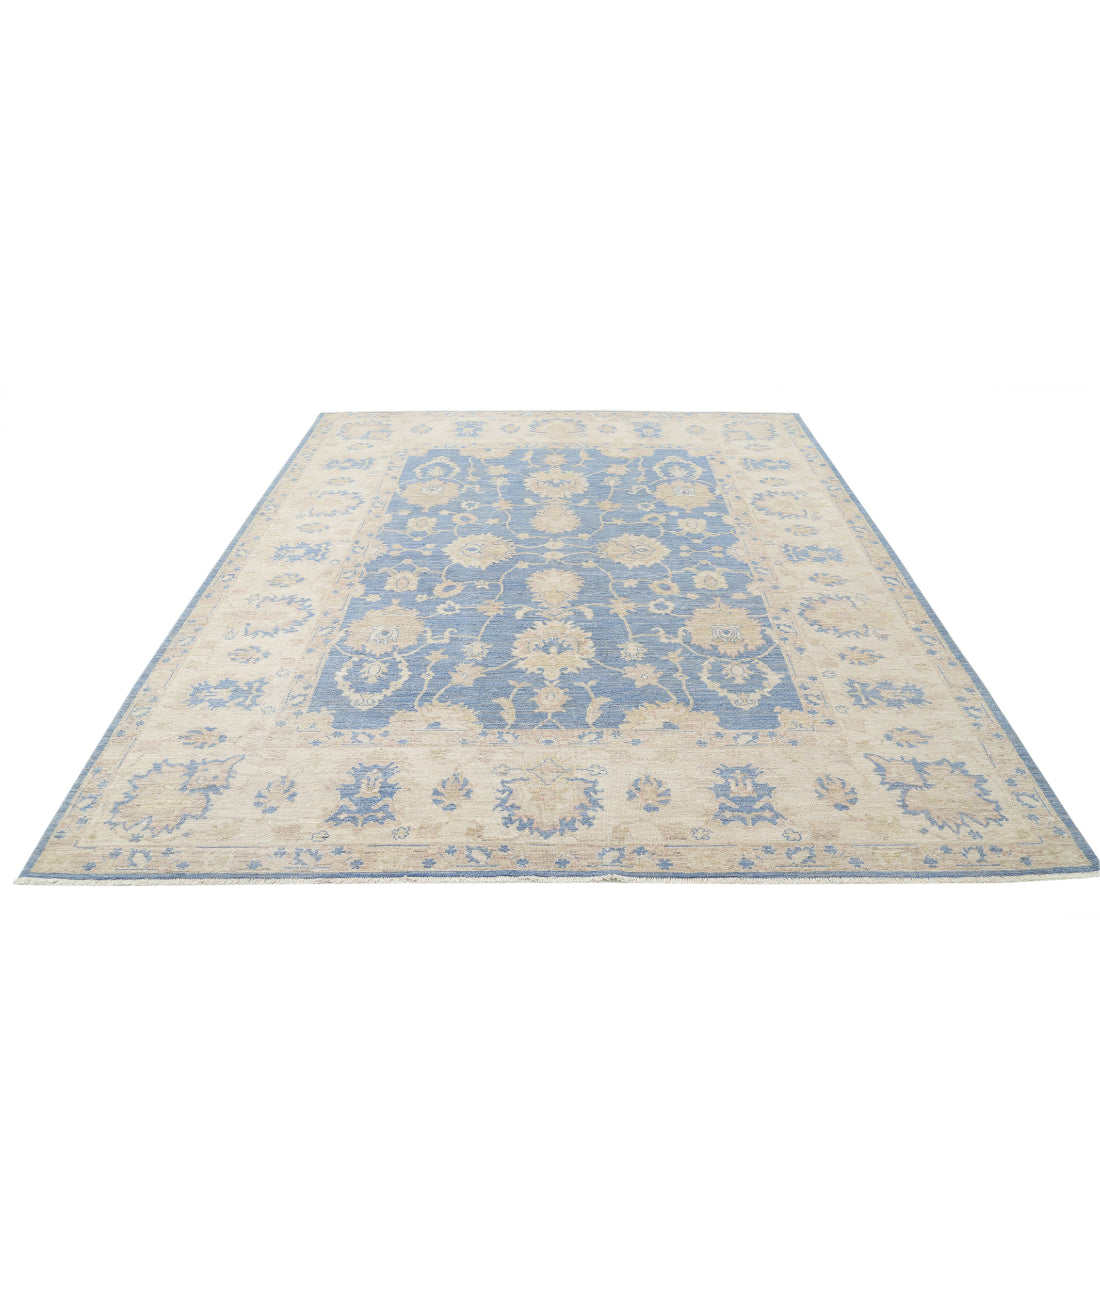 Hand Knotted Serenity Wool Rug - 8'1'' x 9'9'' 8'1'' x 9'9'' (243 X 293) / Blue / Ivory